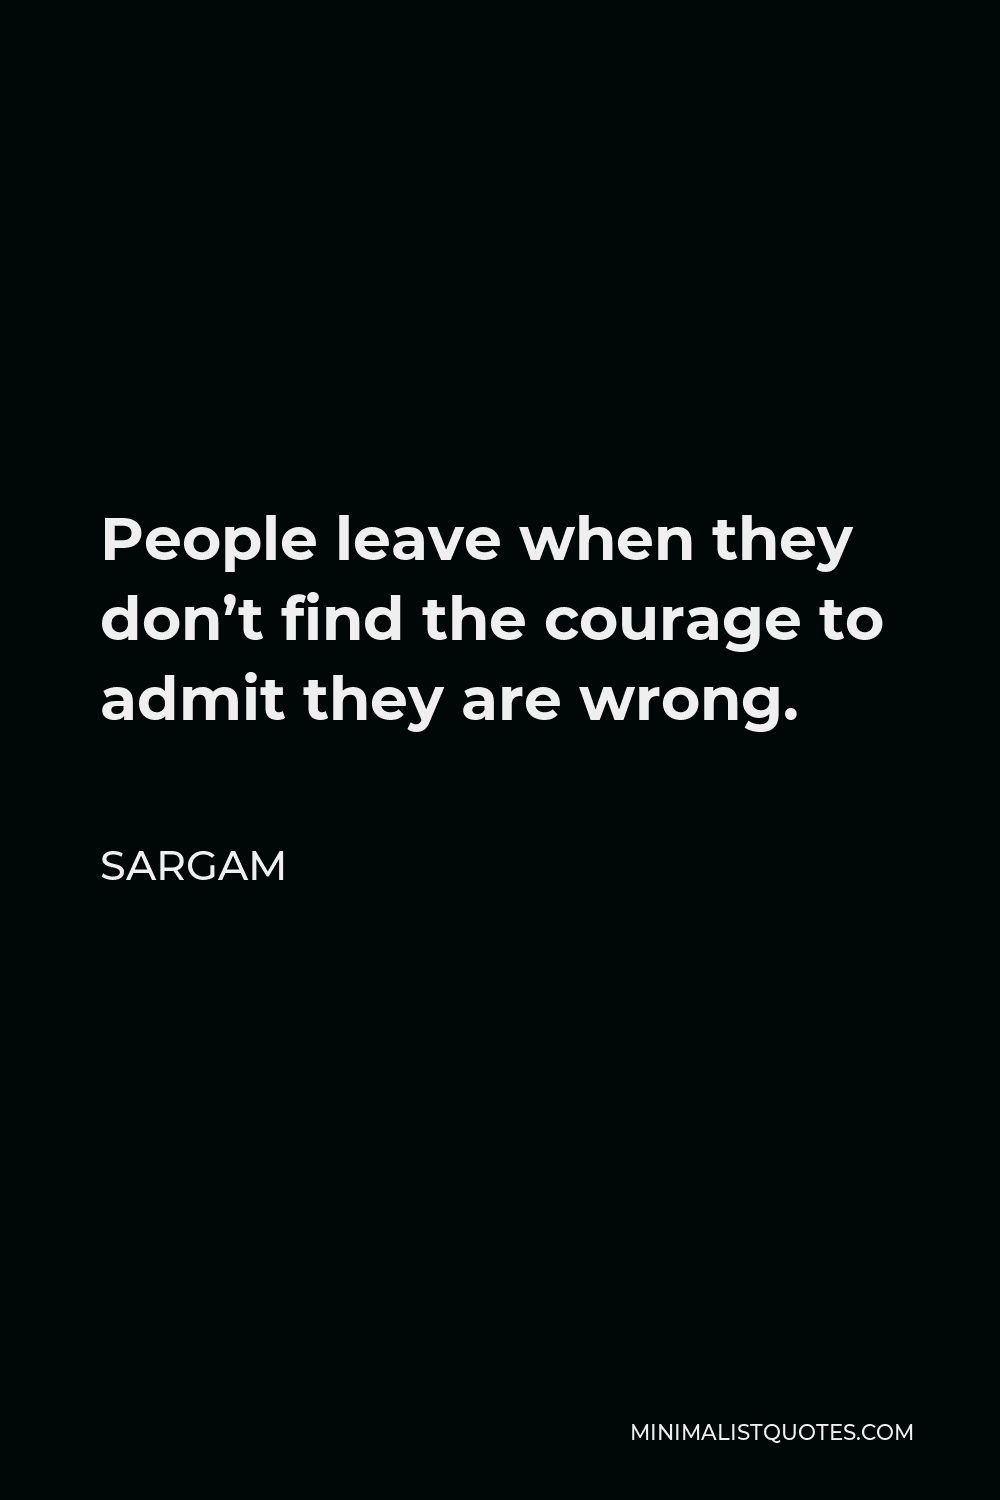 Sargam Quote - People leave when they don’t find the courage to admit they are wrong.